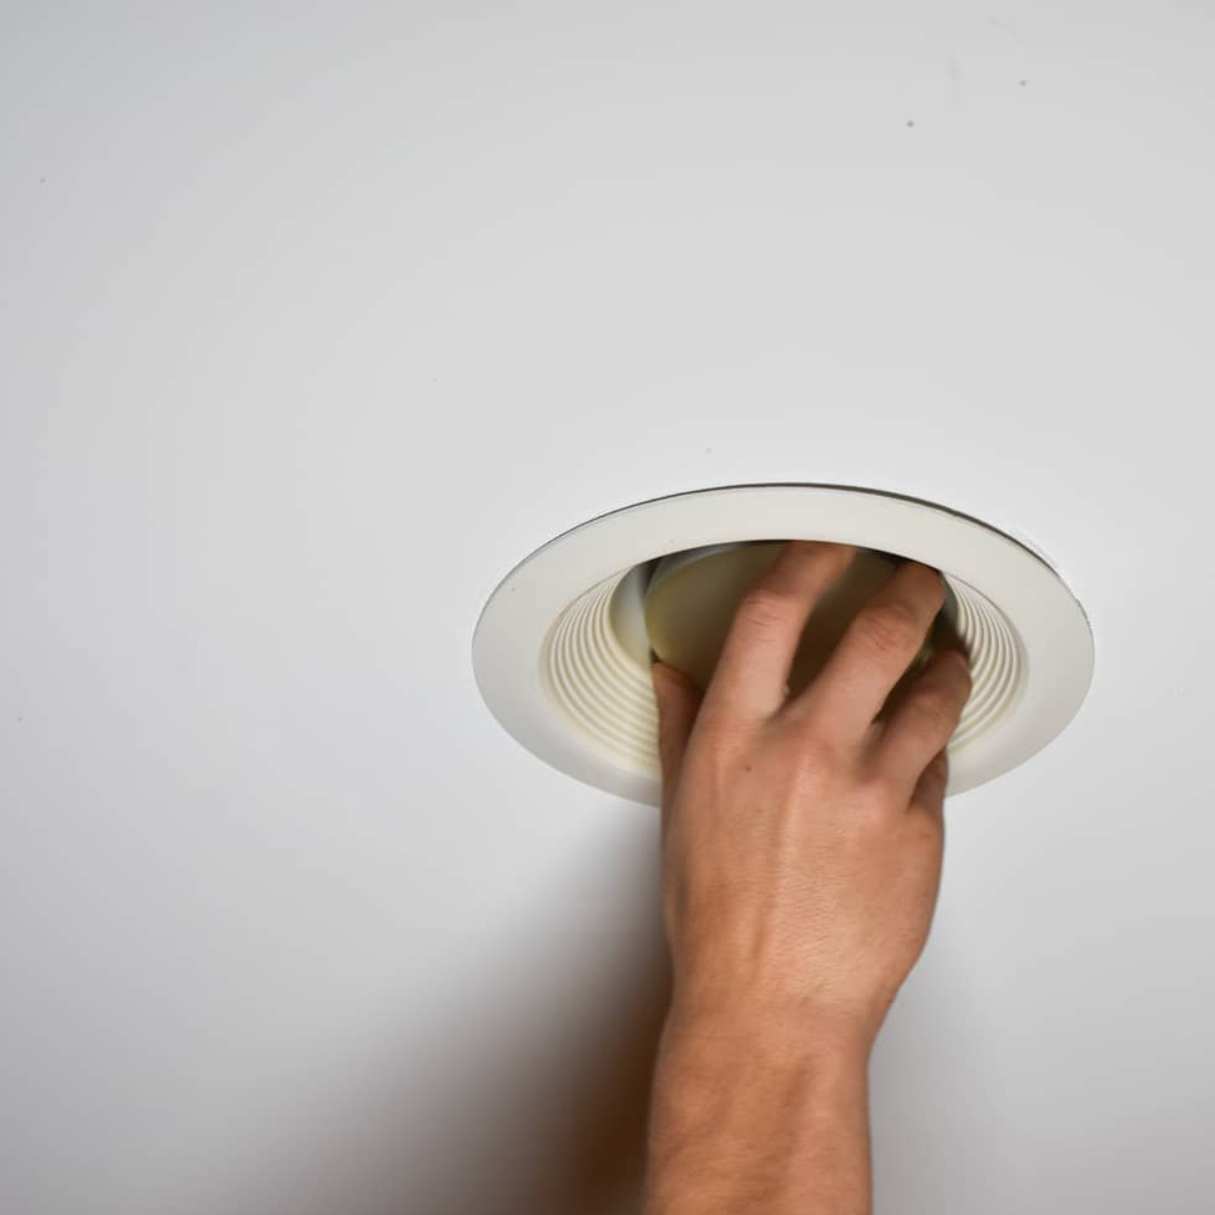 How To Remove Recessed Light Fixture From Ceiling